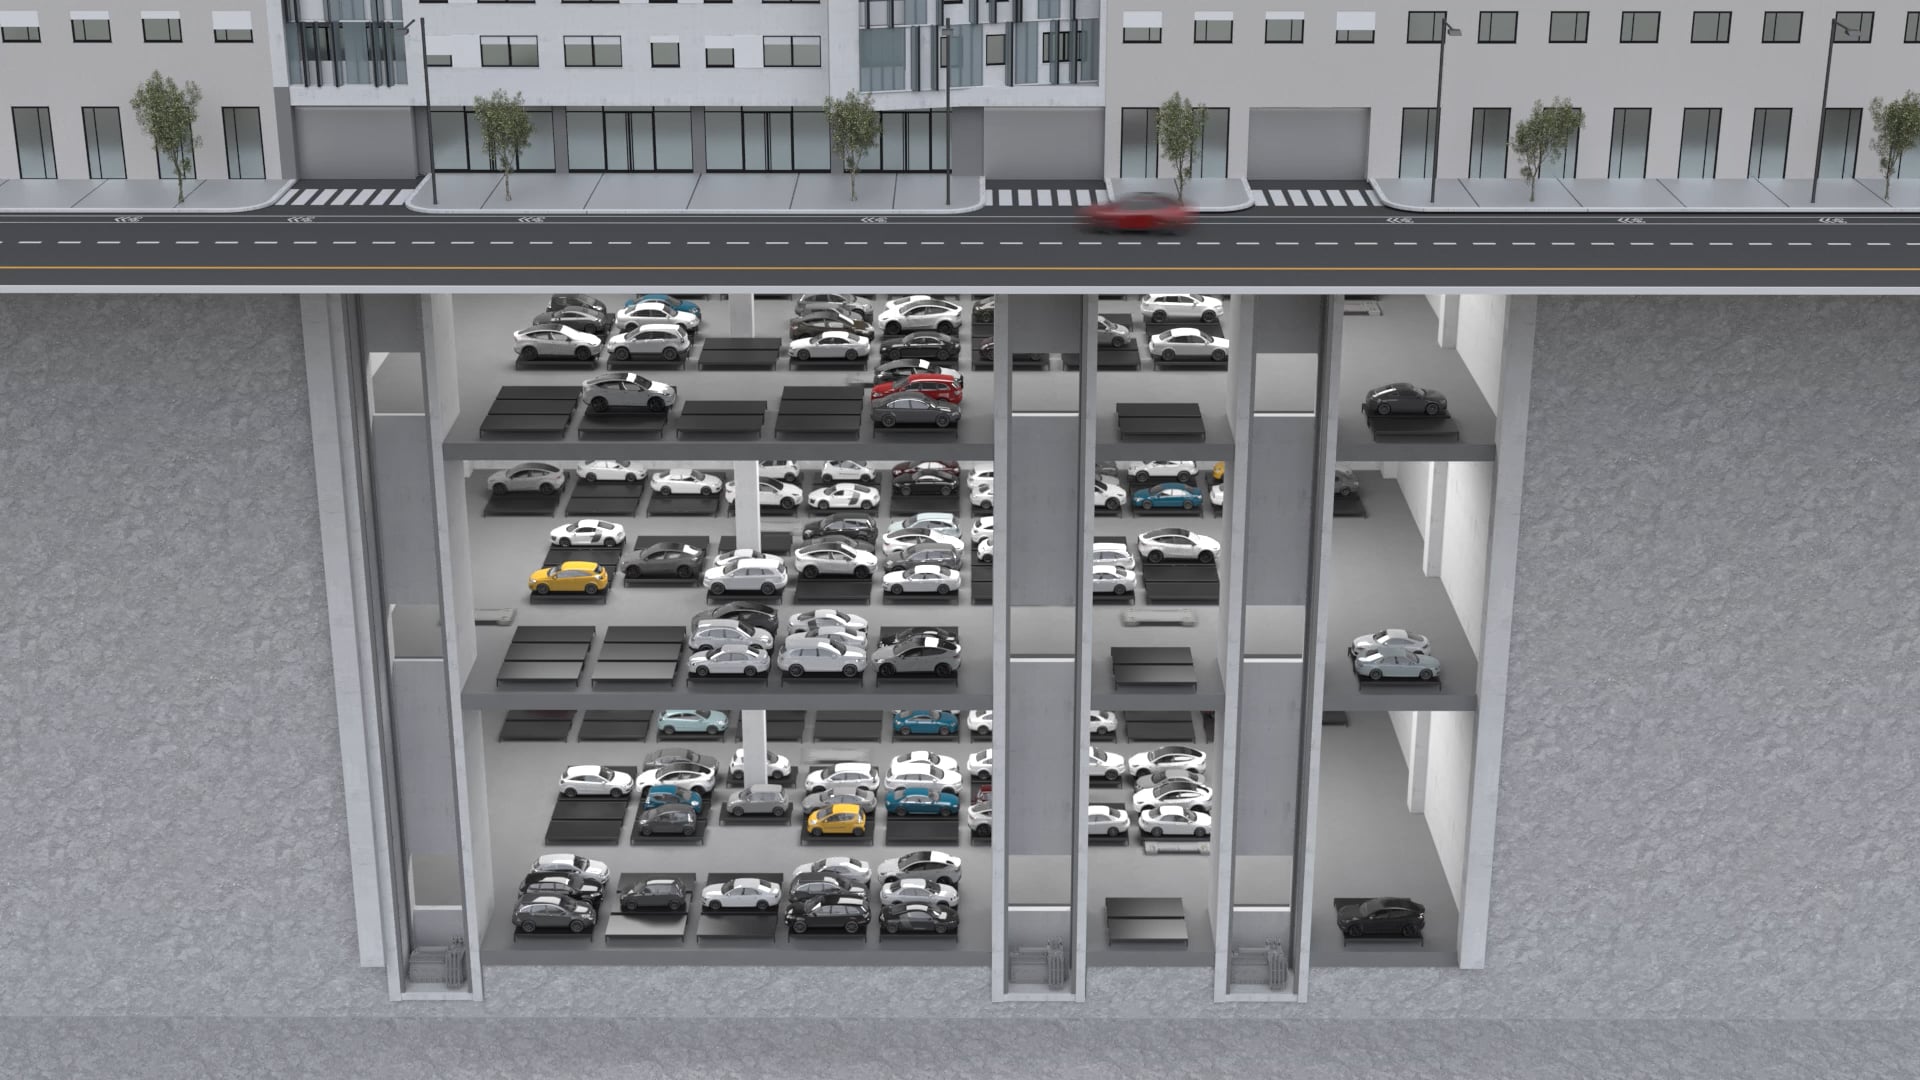 A detailed cross-sectional view of an underground multi-level parking garage is shown. The structure reveals various levels filled with parked cars, different in size and color. A road with a moving red car runs above the parking facility.